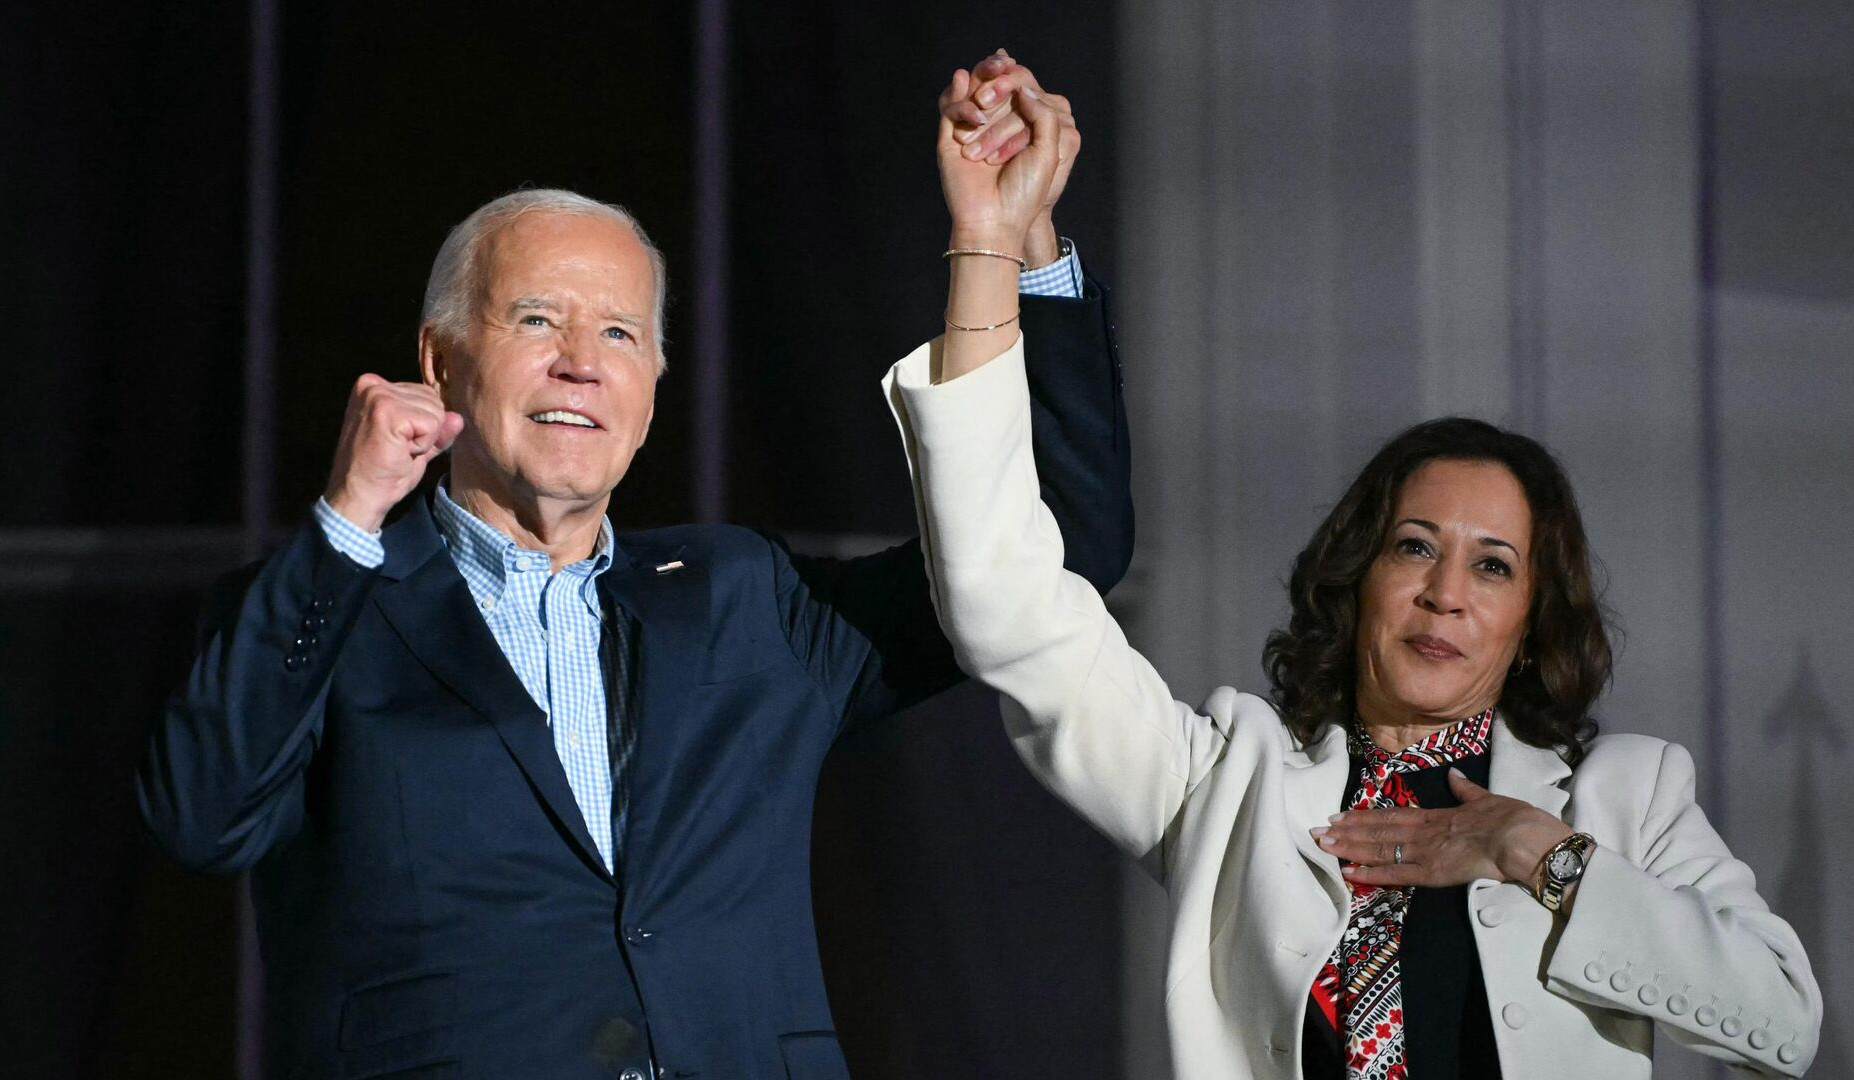 Biden drops out and endorses Kamala Harris, upending 2024 presidential race against Trump